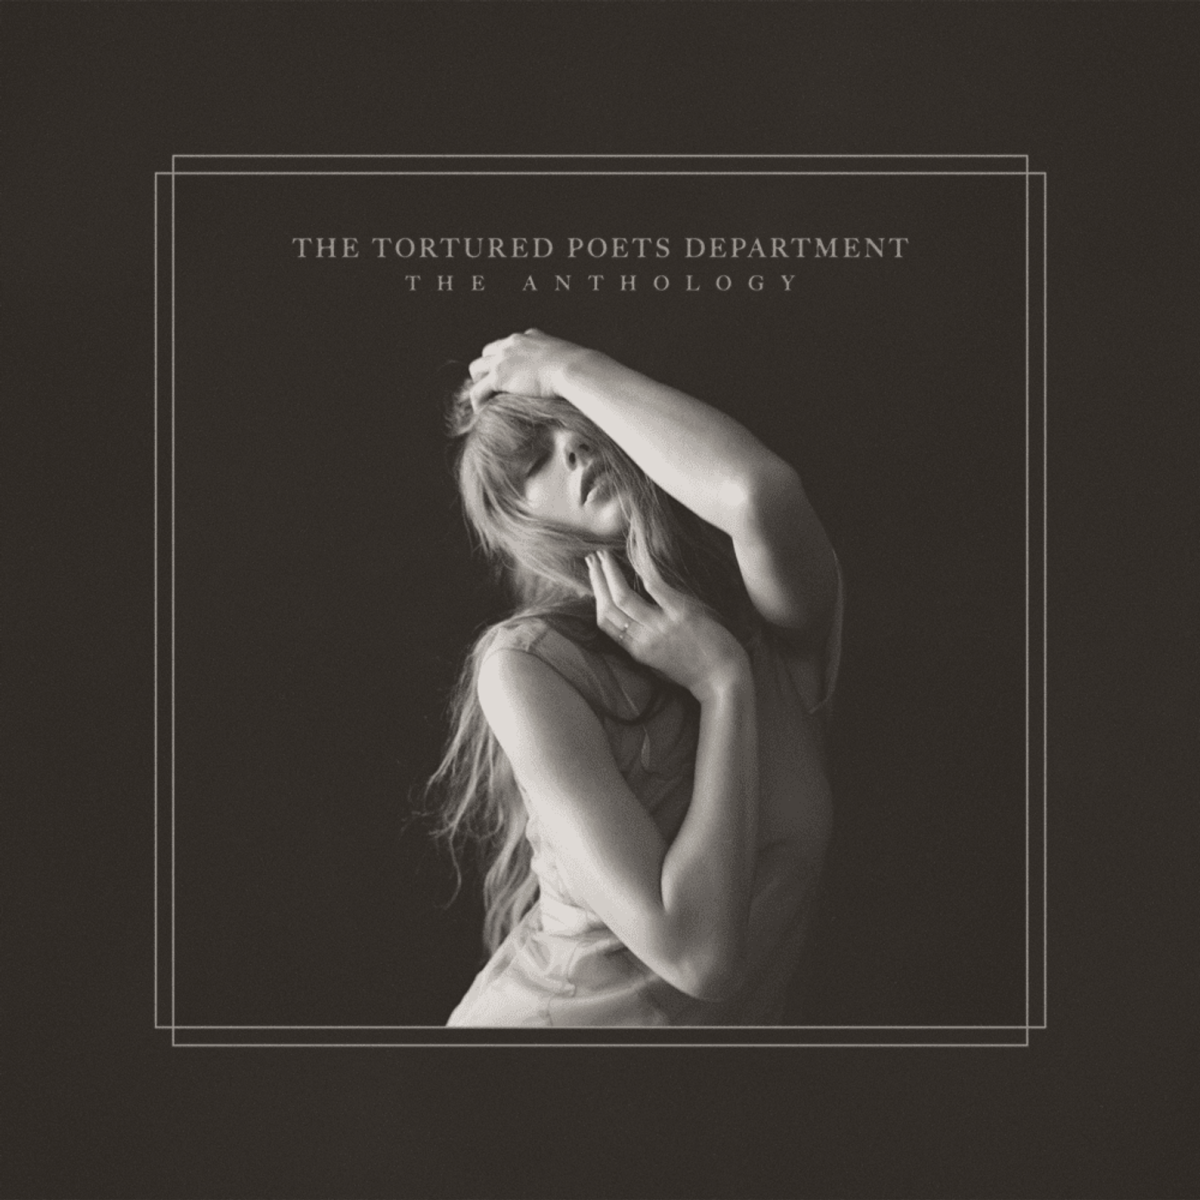 The official album cover for Taylor Swift’s latest album, “The Tortured Poets Department,” released on April 19.